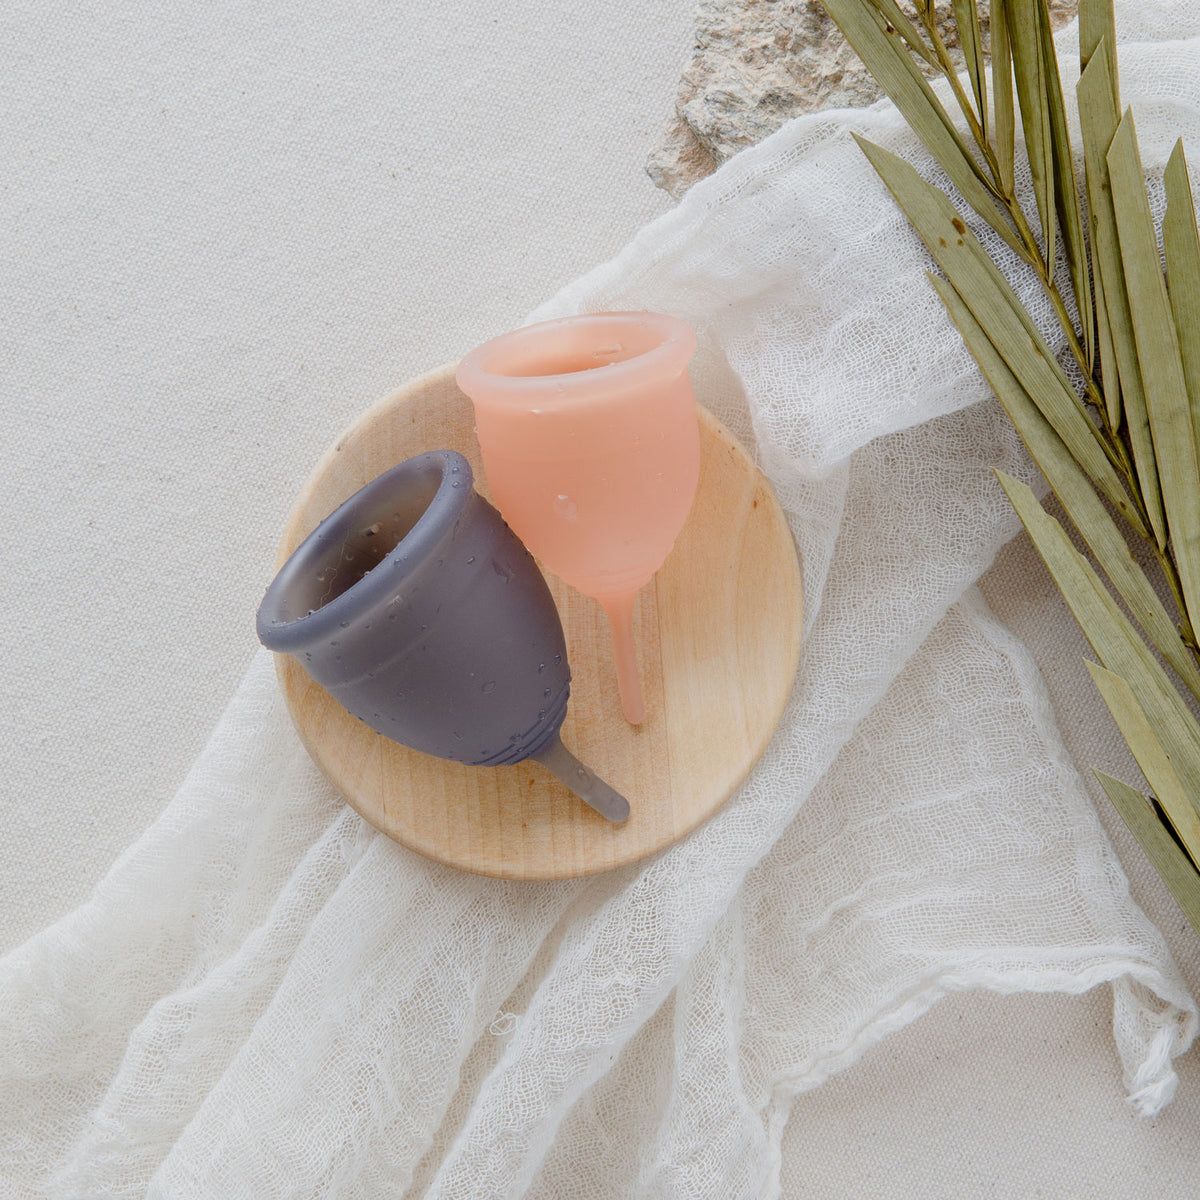 Gray and light pink menstrual cups